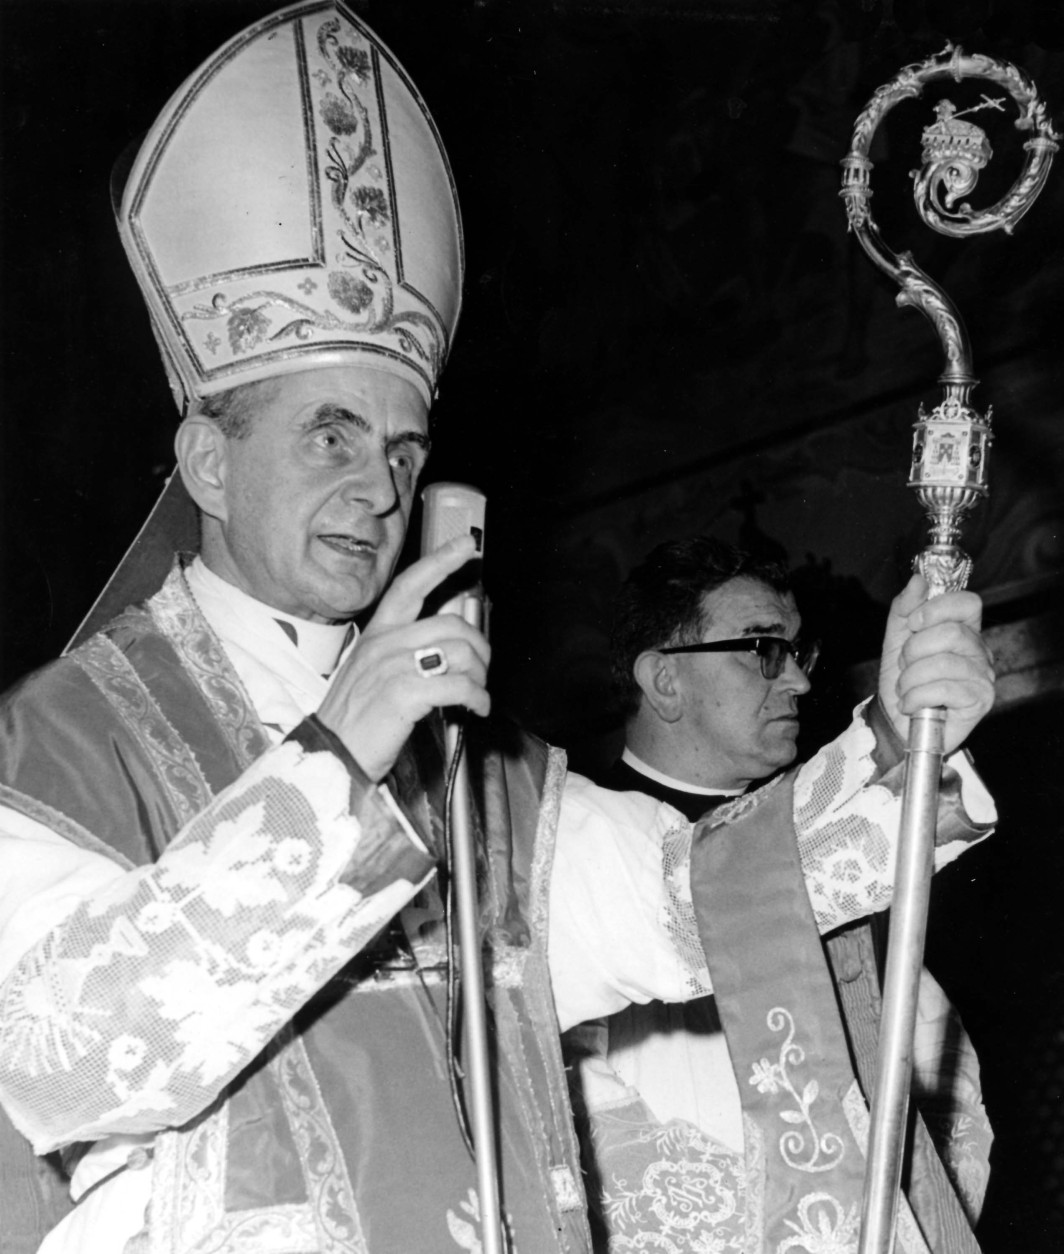 Giovanni Battista Card. Montini, Archbishop of Milan, preaching during religious ceremony on "Corpus Christi" day, in Milan June 13, 1963. He was elected new Pope June 21 with name of Paul VI. (Ap Photo)